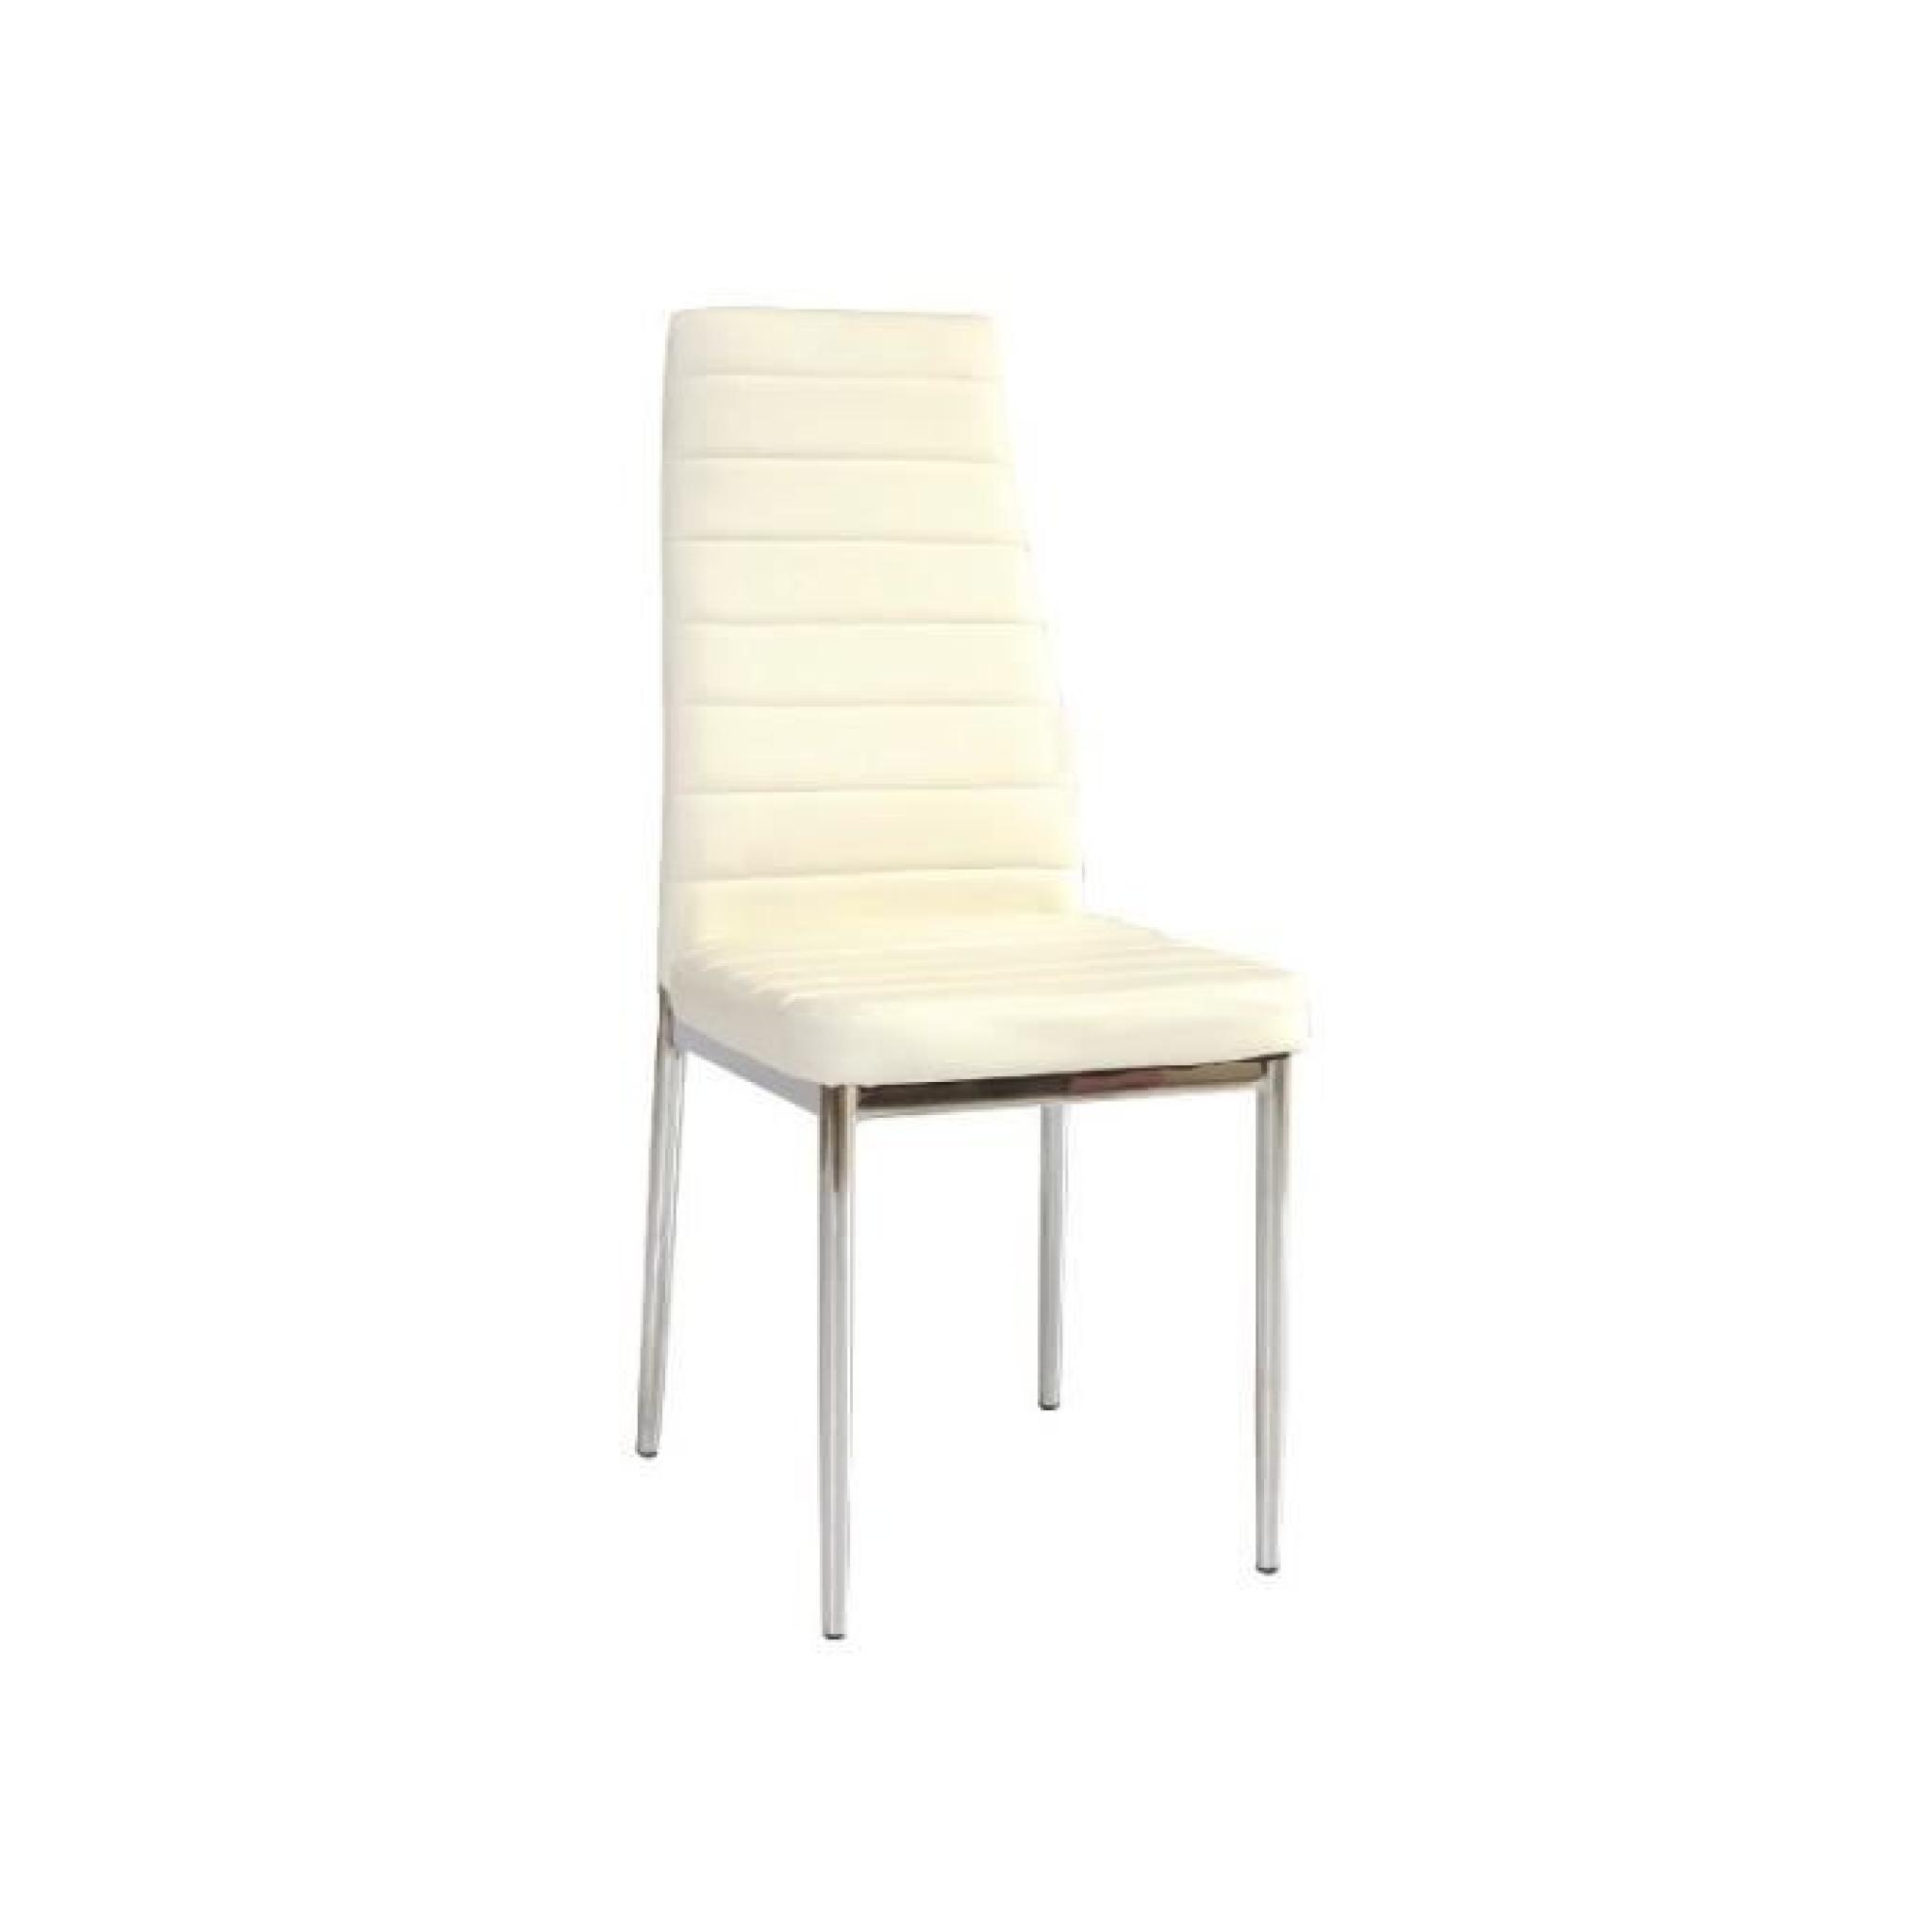 JUSThome H-261 Chaise Blanc 96 x 39 x 38